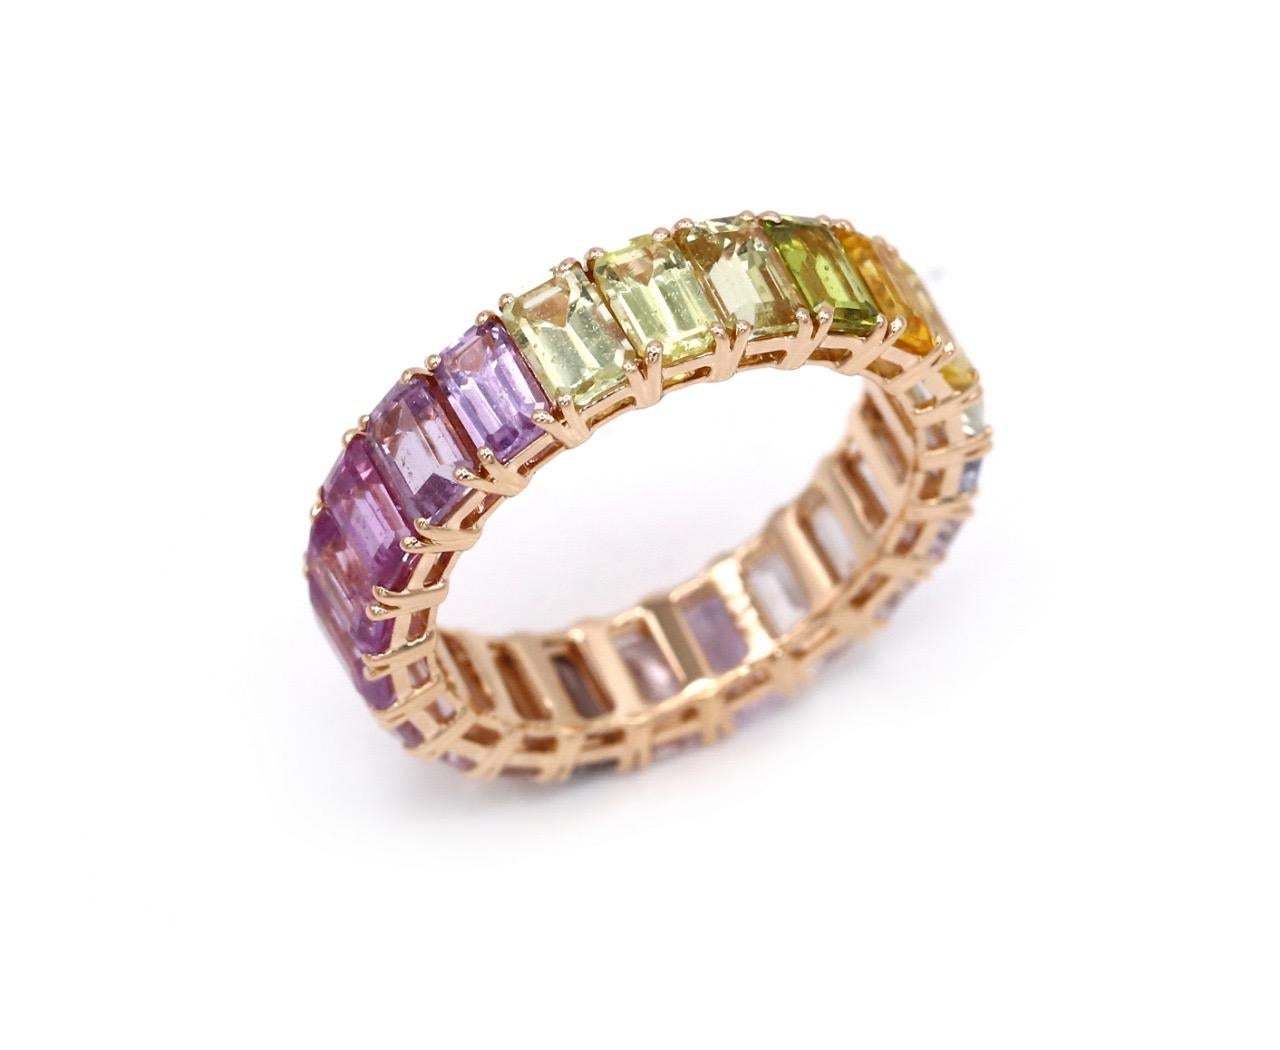 21 Baguette cut saphires fade from green to purple creating a balanced circular composition. By twisting the ring you get different looks depending on your mood. This is a solid alternative to classy mono-stone rings, which will never go out of